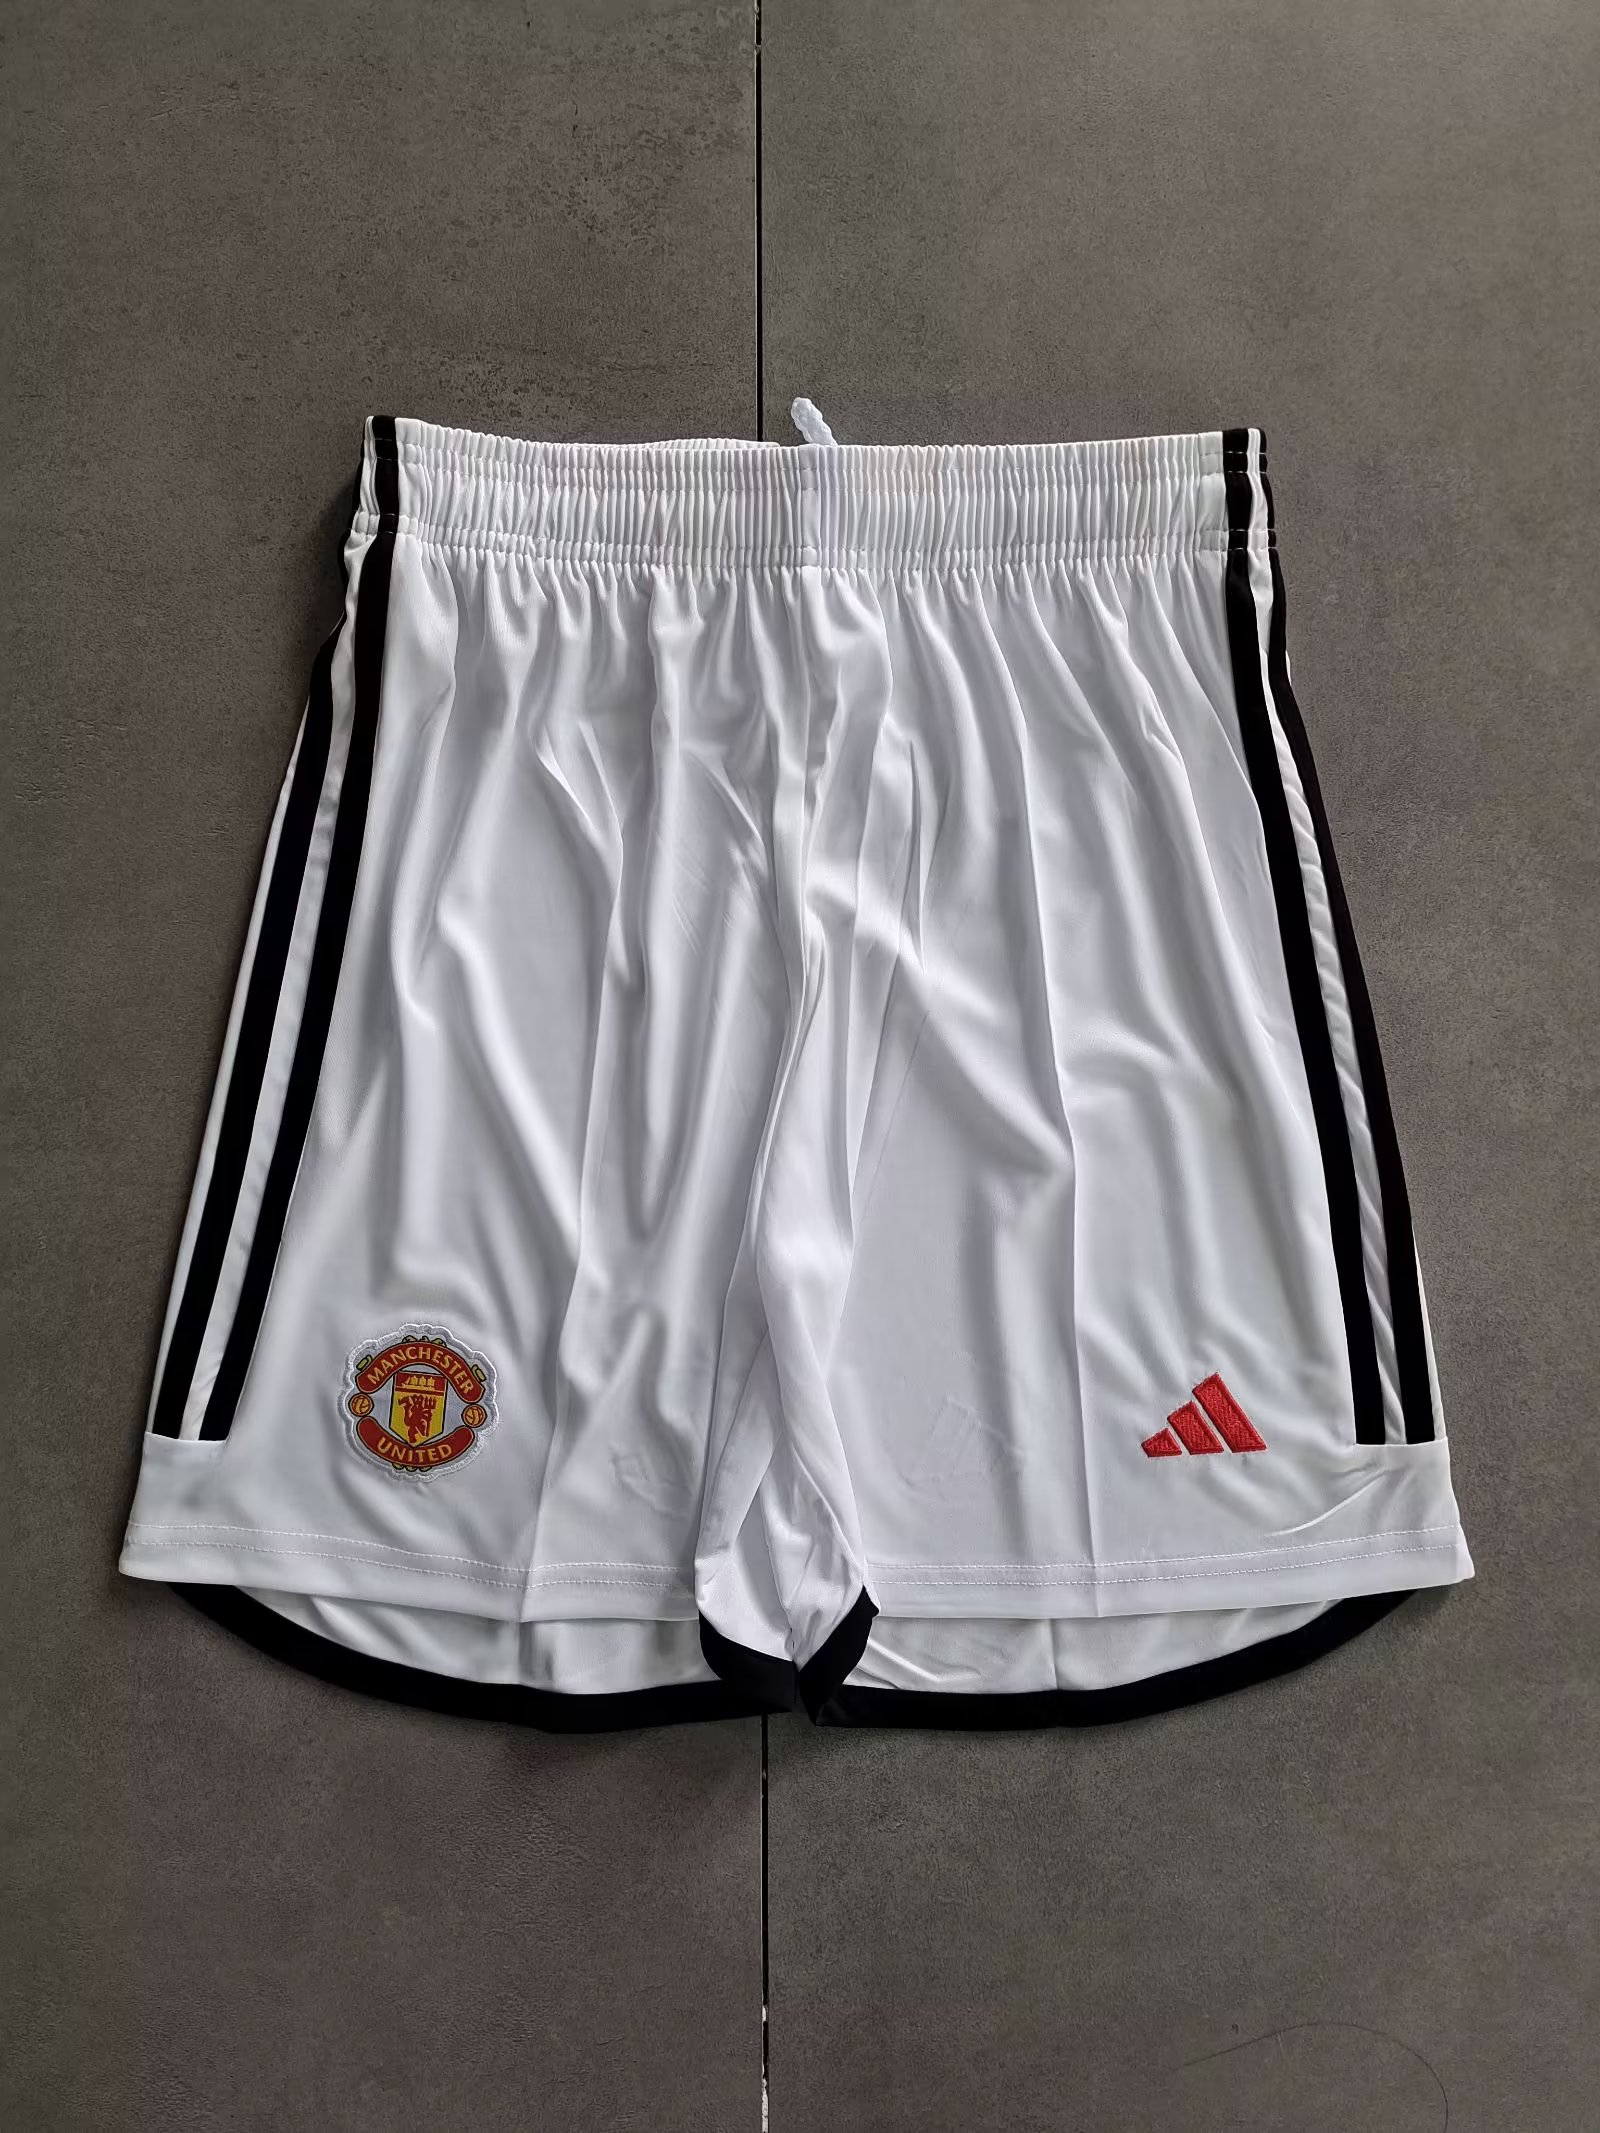 2023/2024 Manchester United home shorts